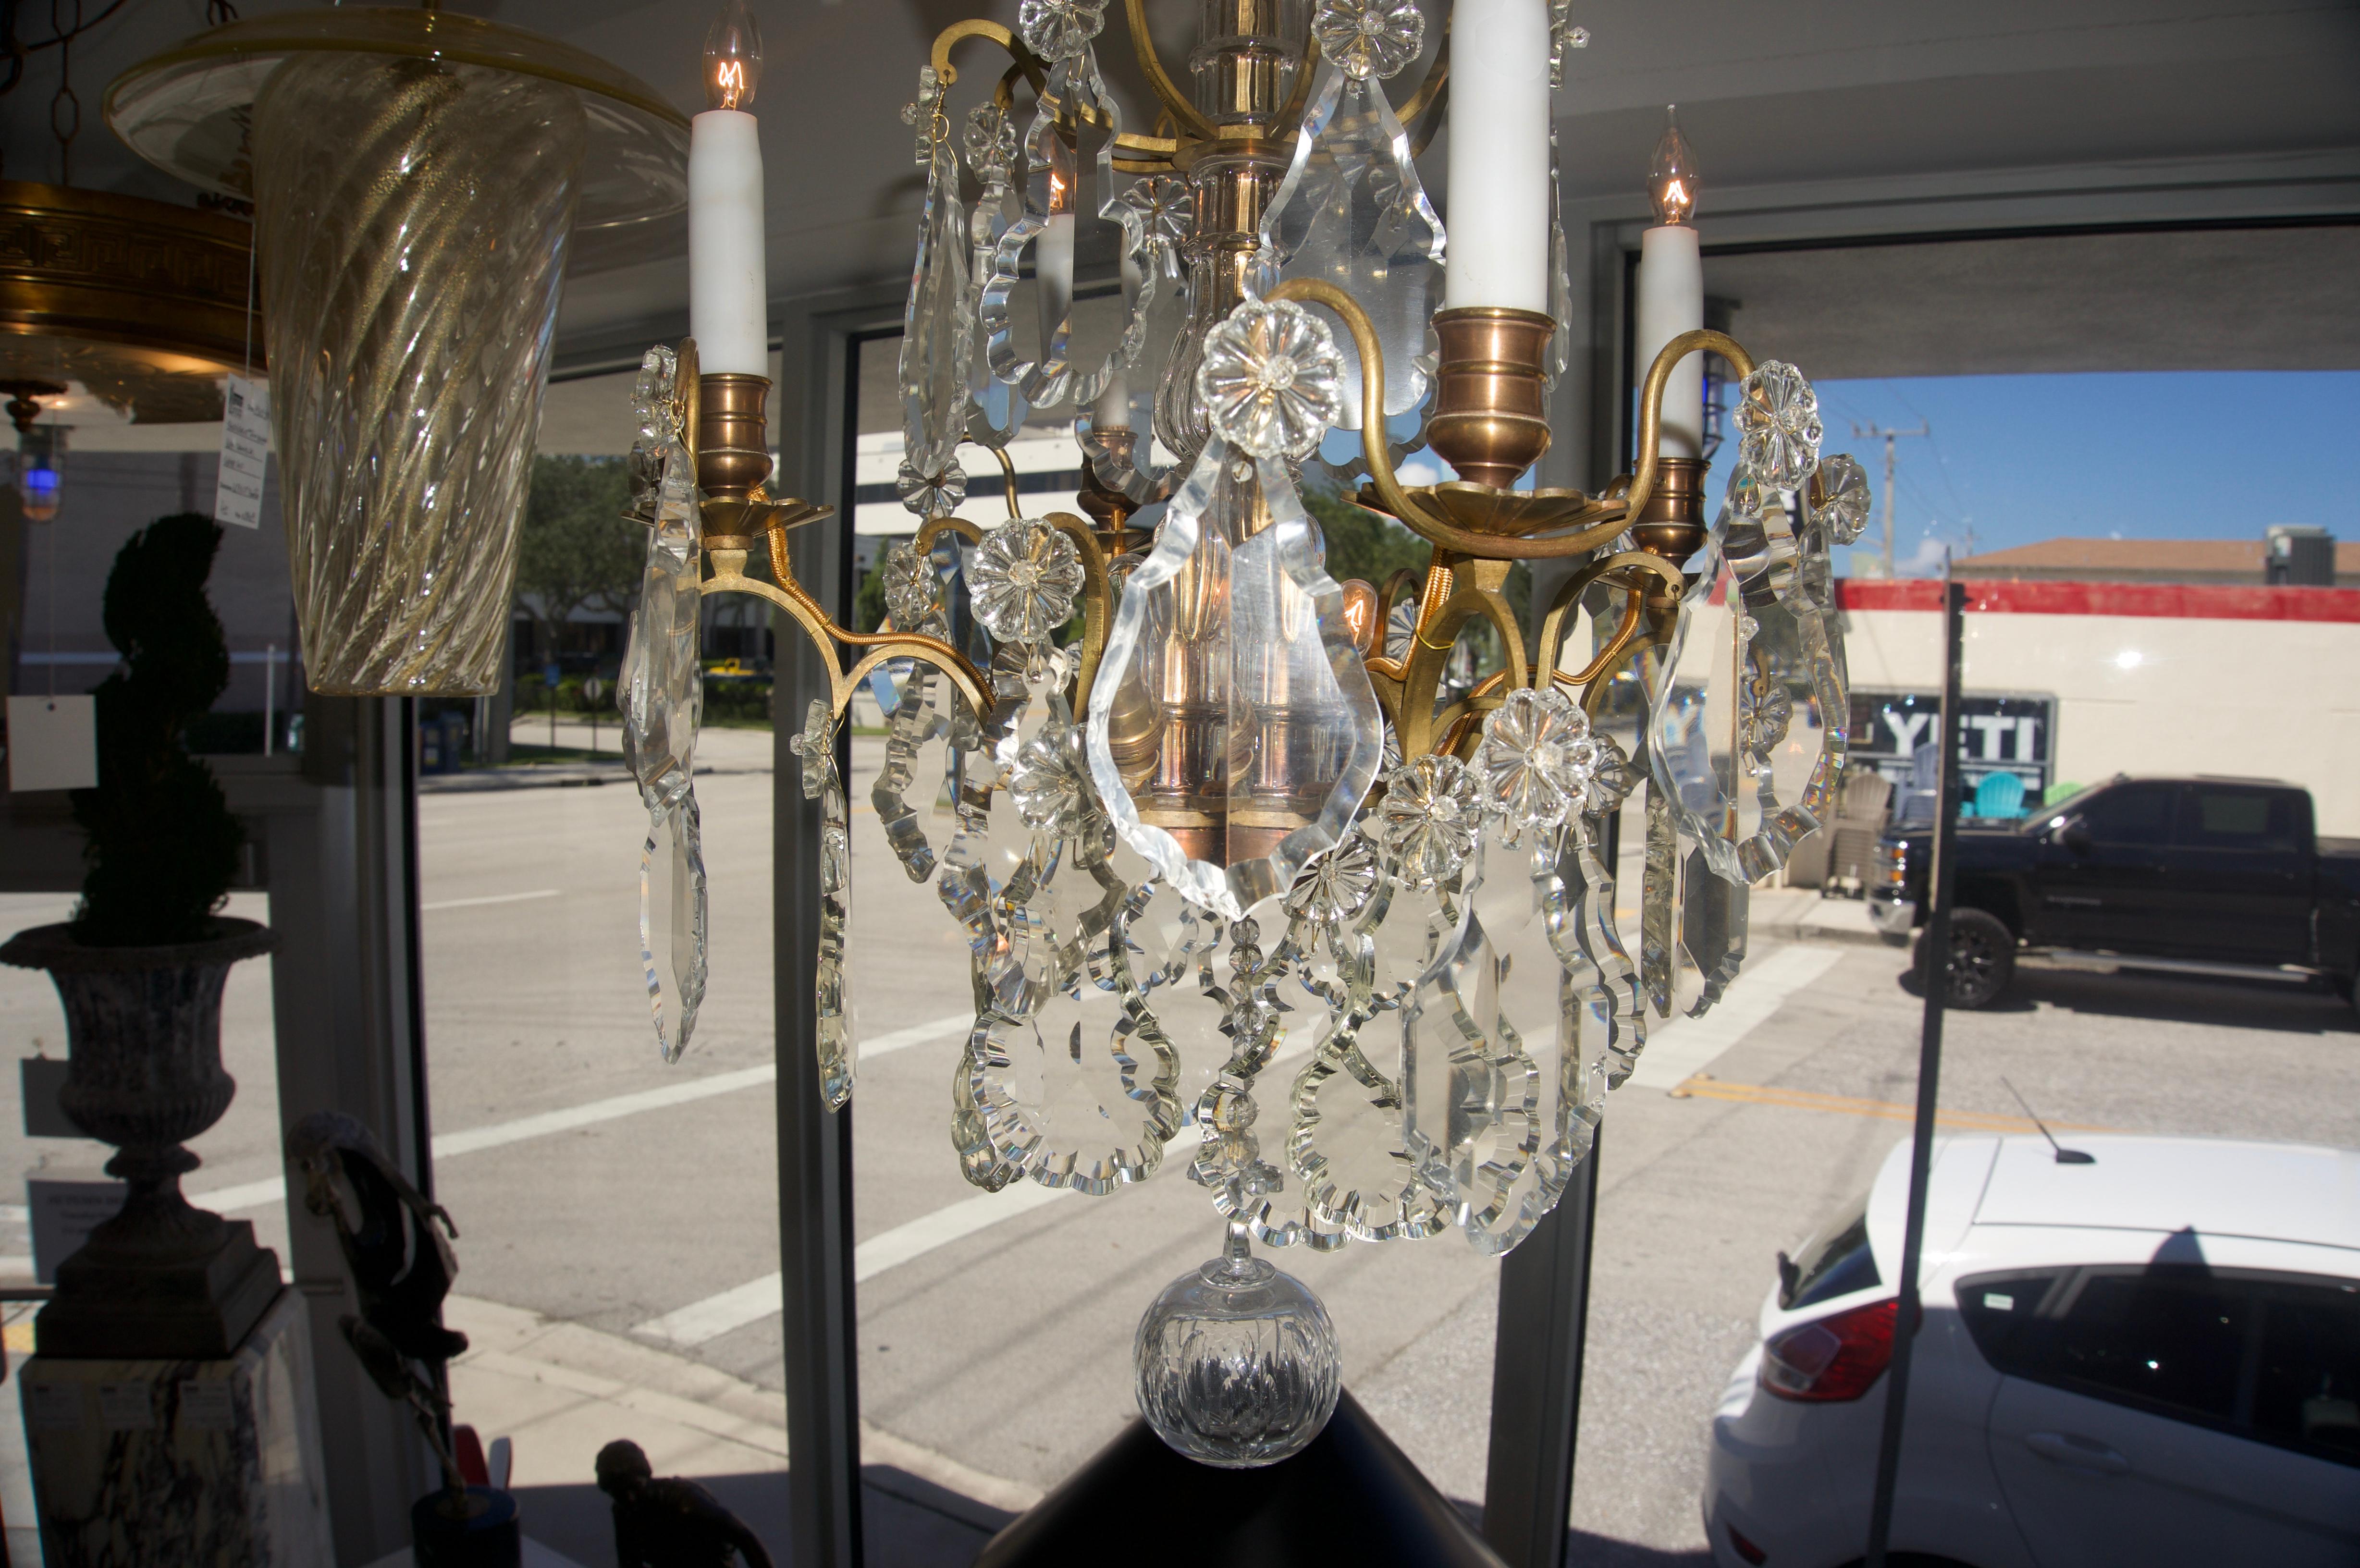 This stylish and chic Louis XV style chandelier was acquired on a buying trip in France and the piece dates to the mid-1800s and is of the best quality bronze and crystals.

The proportion's of the piece are spot-on and the handcut crystals all